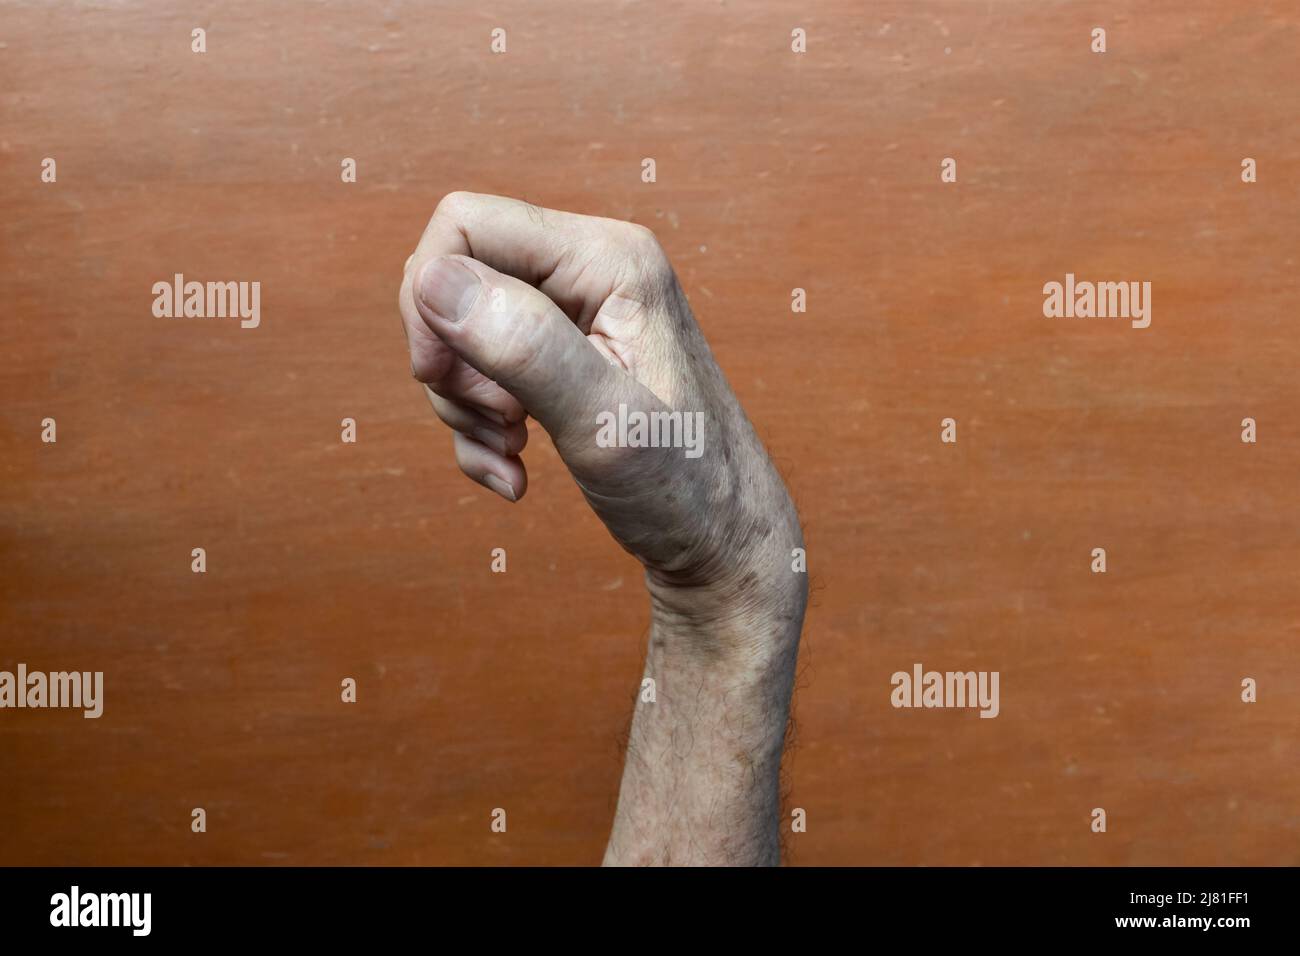 Hand muscle rigidity and finger flexion of Asian elder man. Stock Photo